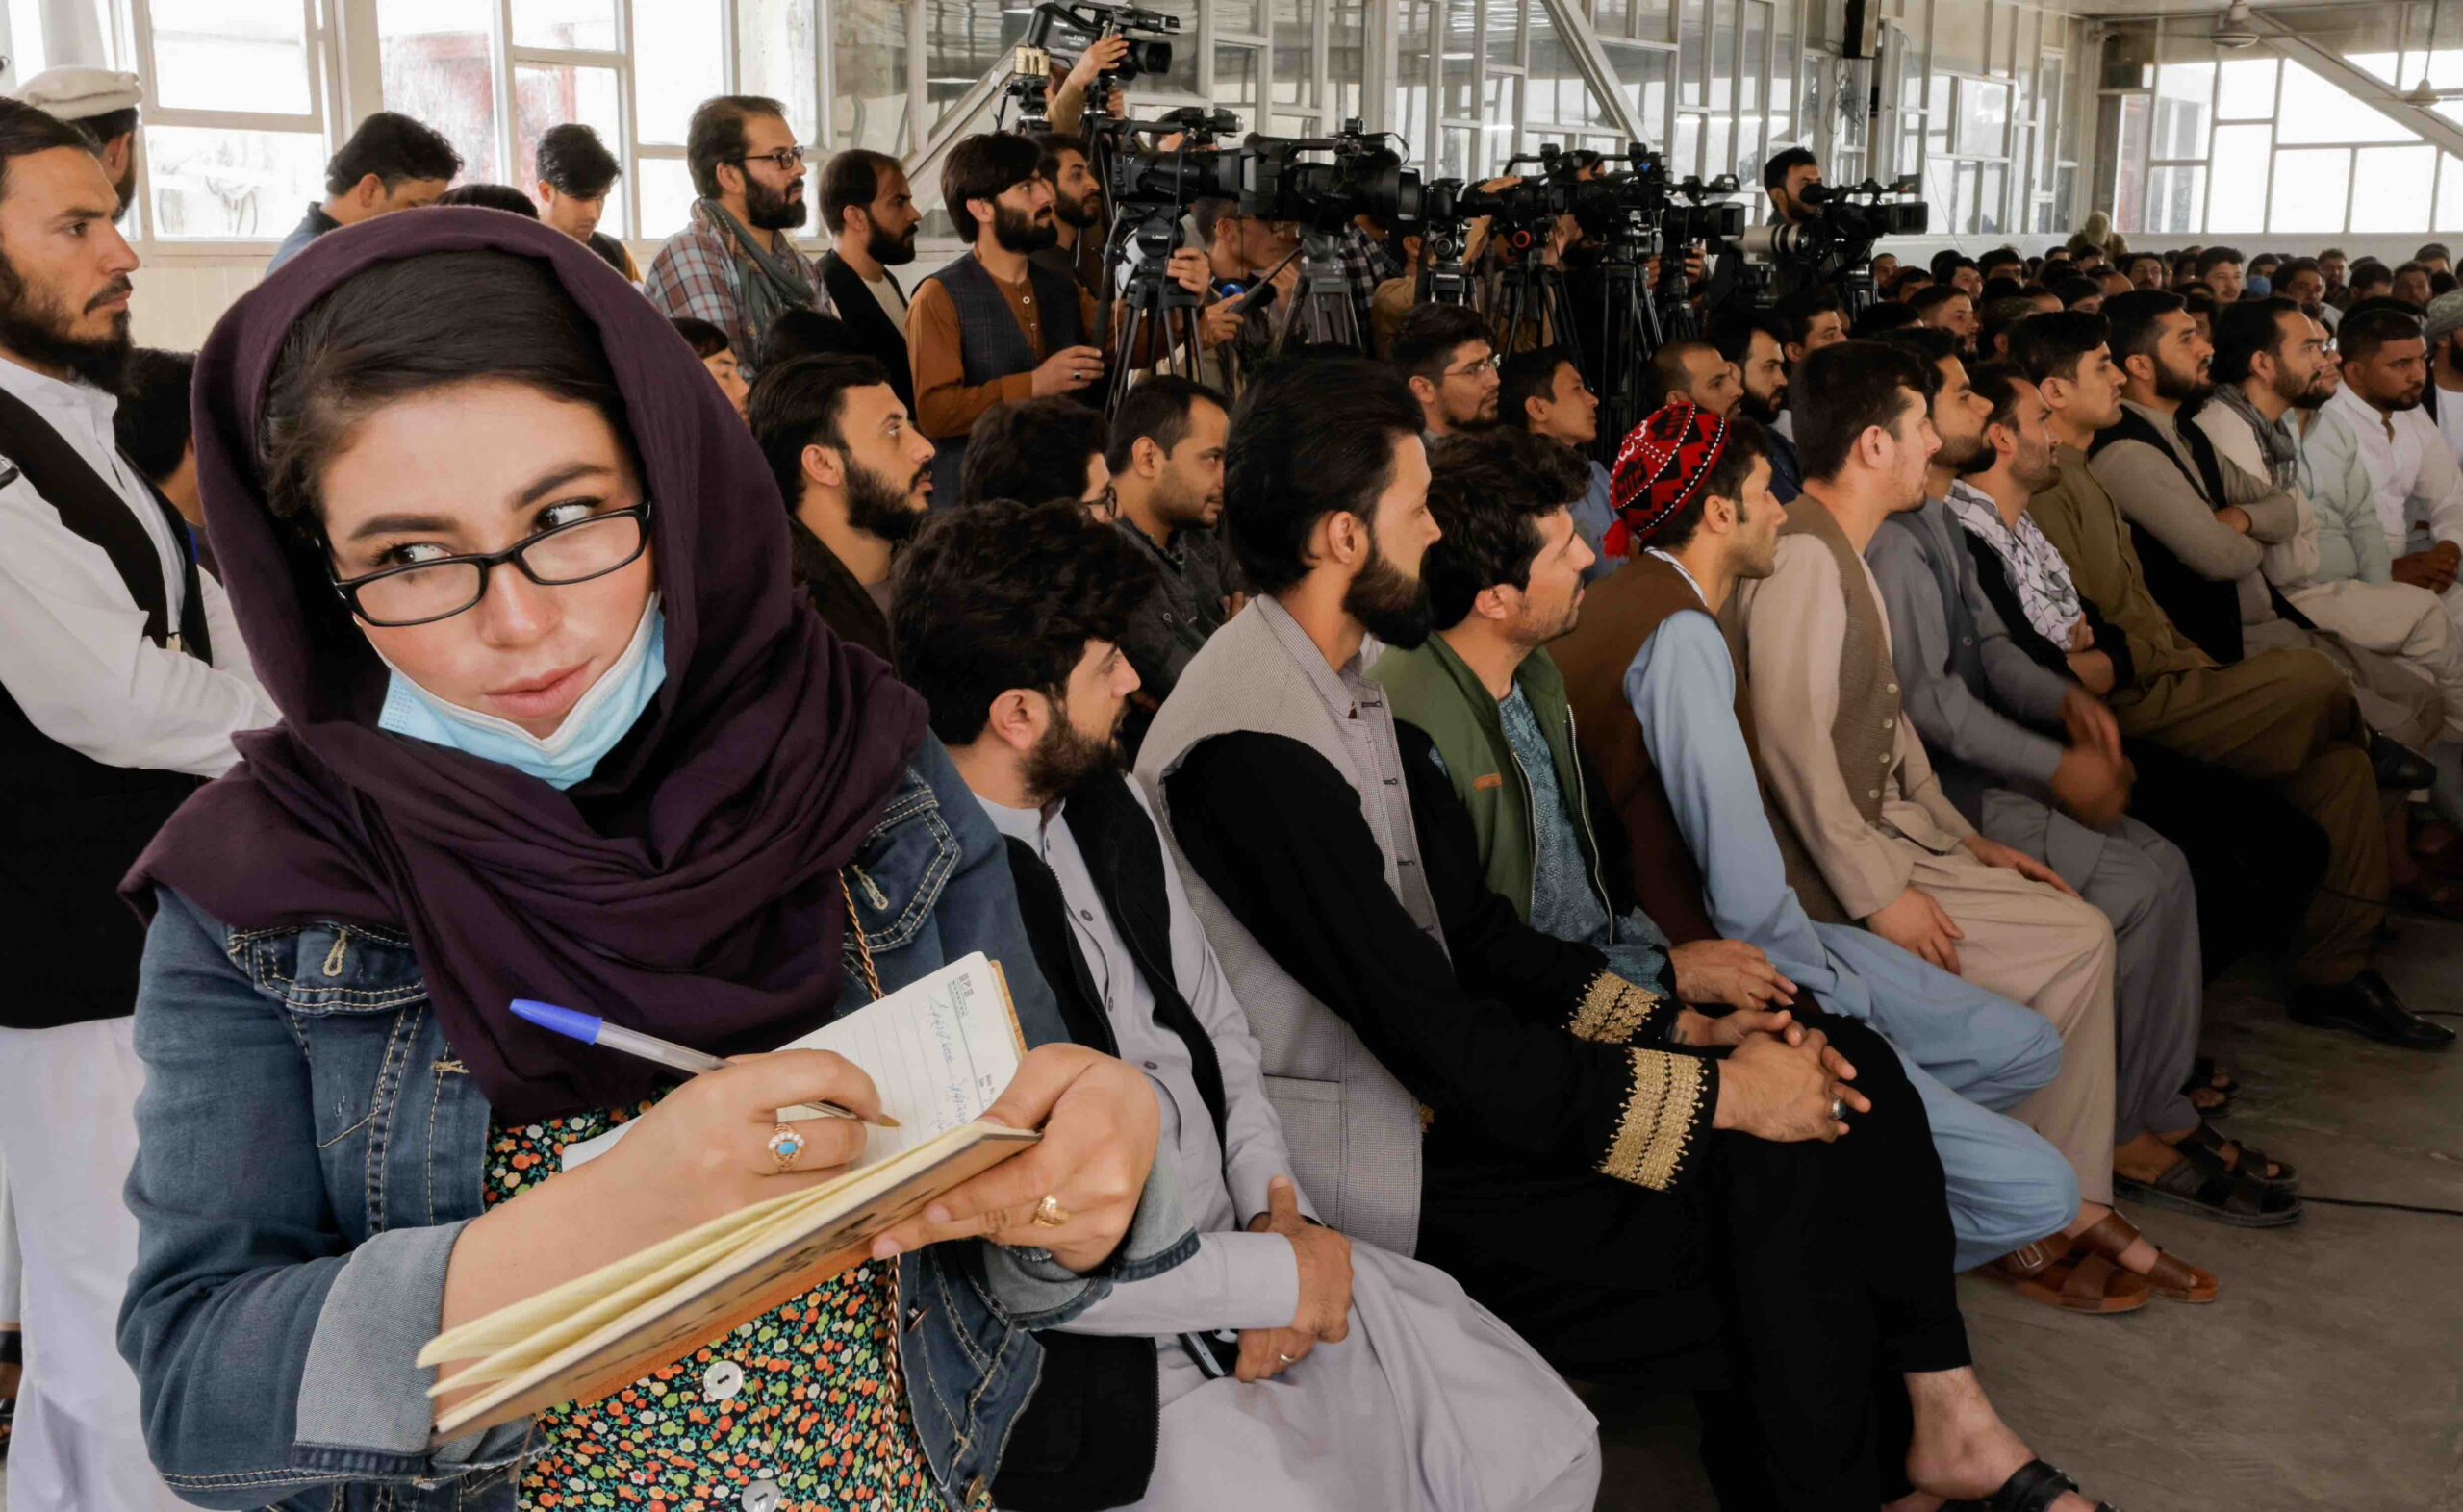 As winter approaches, Afghan women journalists speak out: “I enjoyed all the liberties of life. Now I feel like a prisoner”